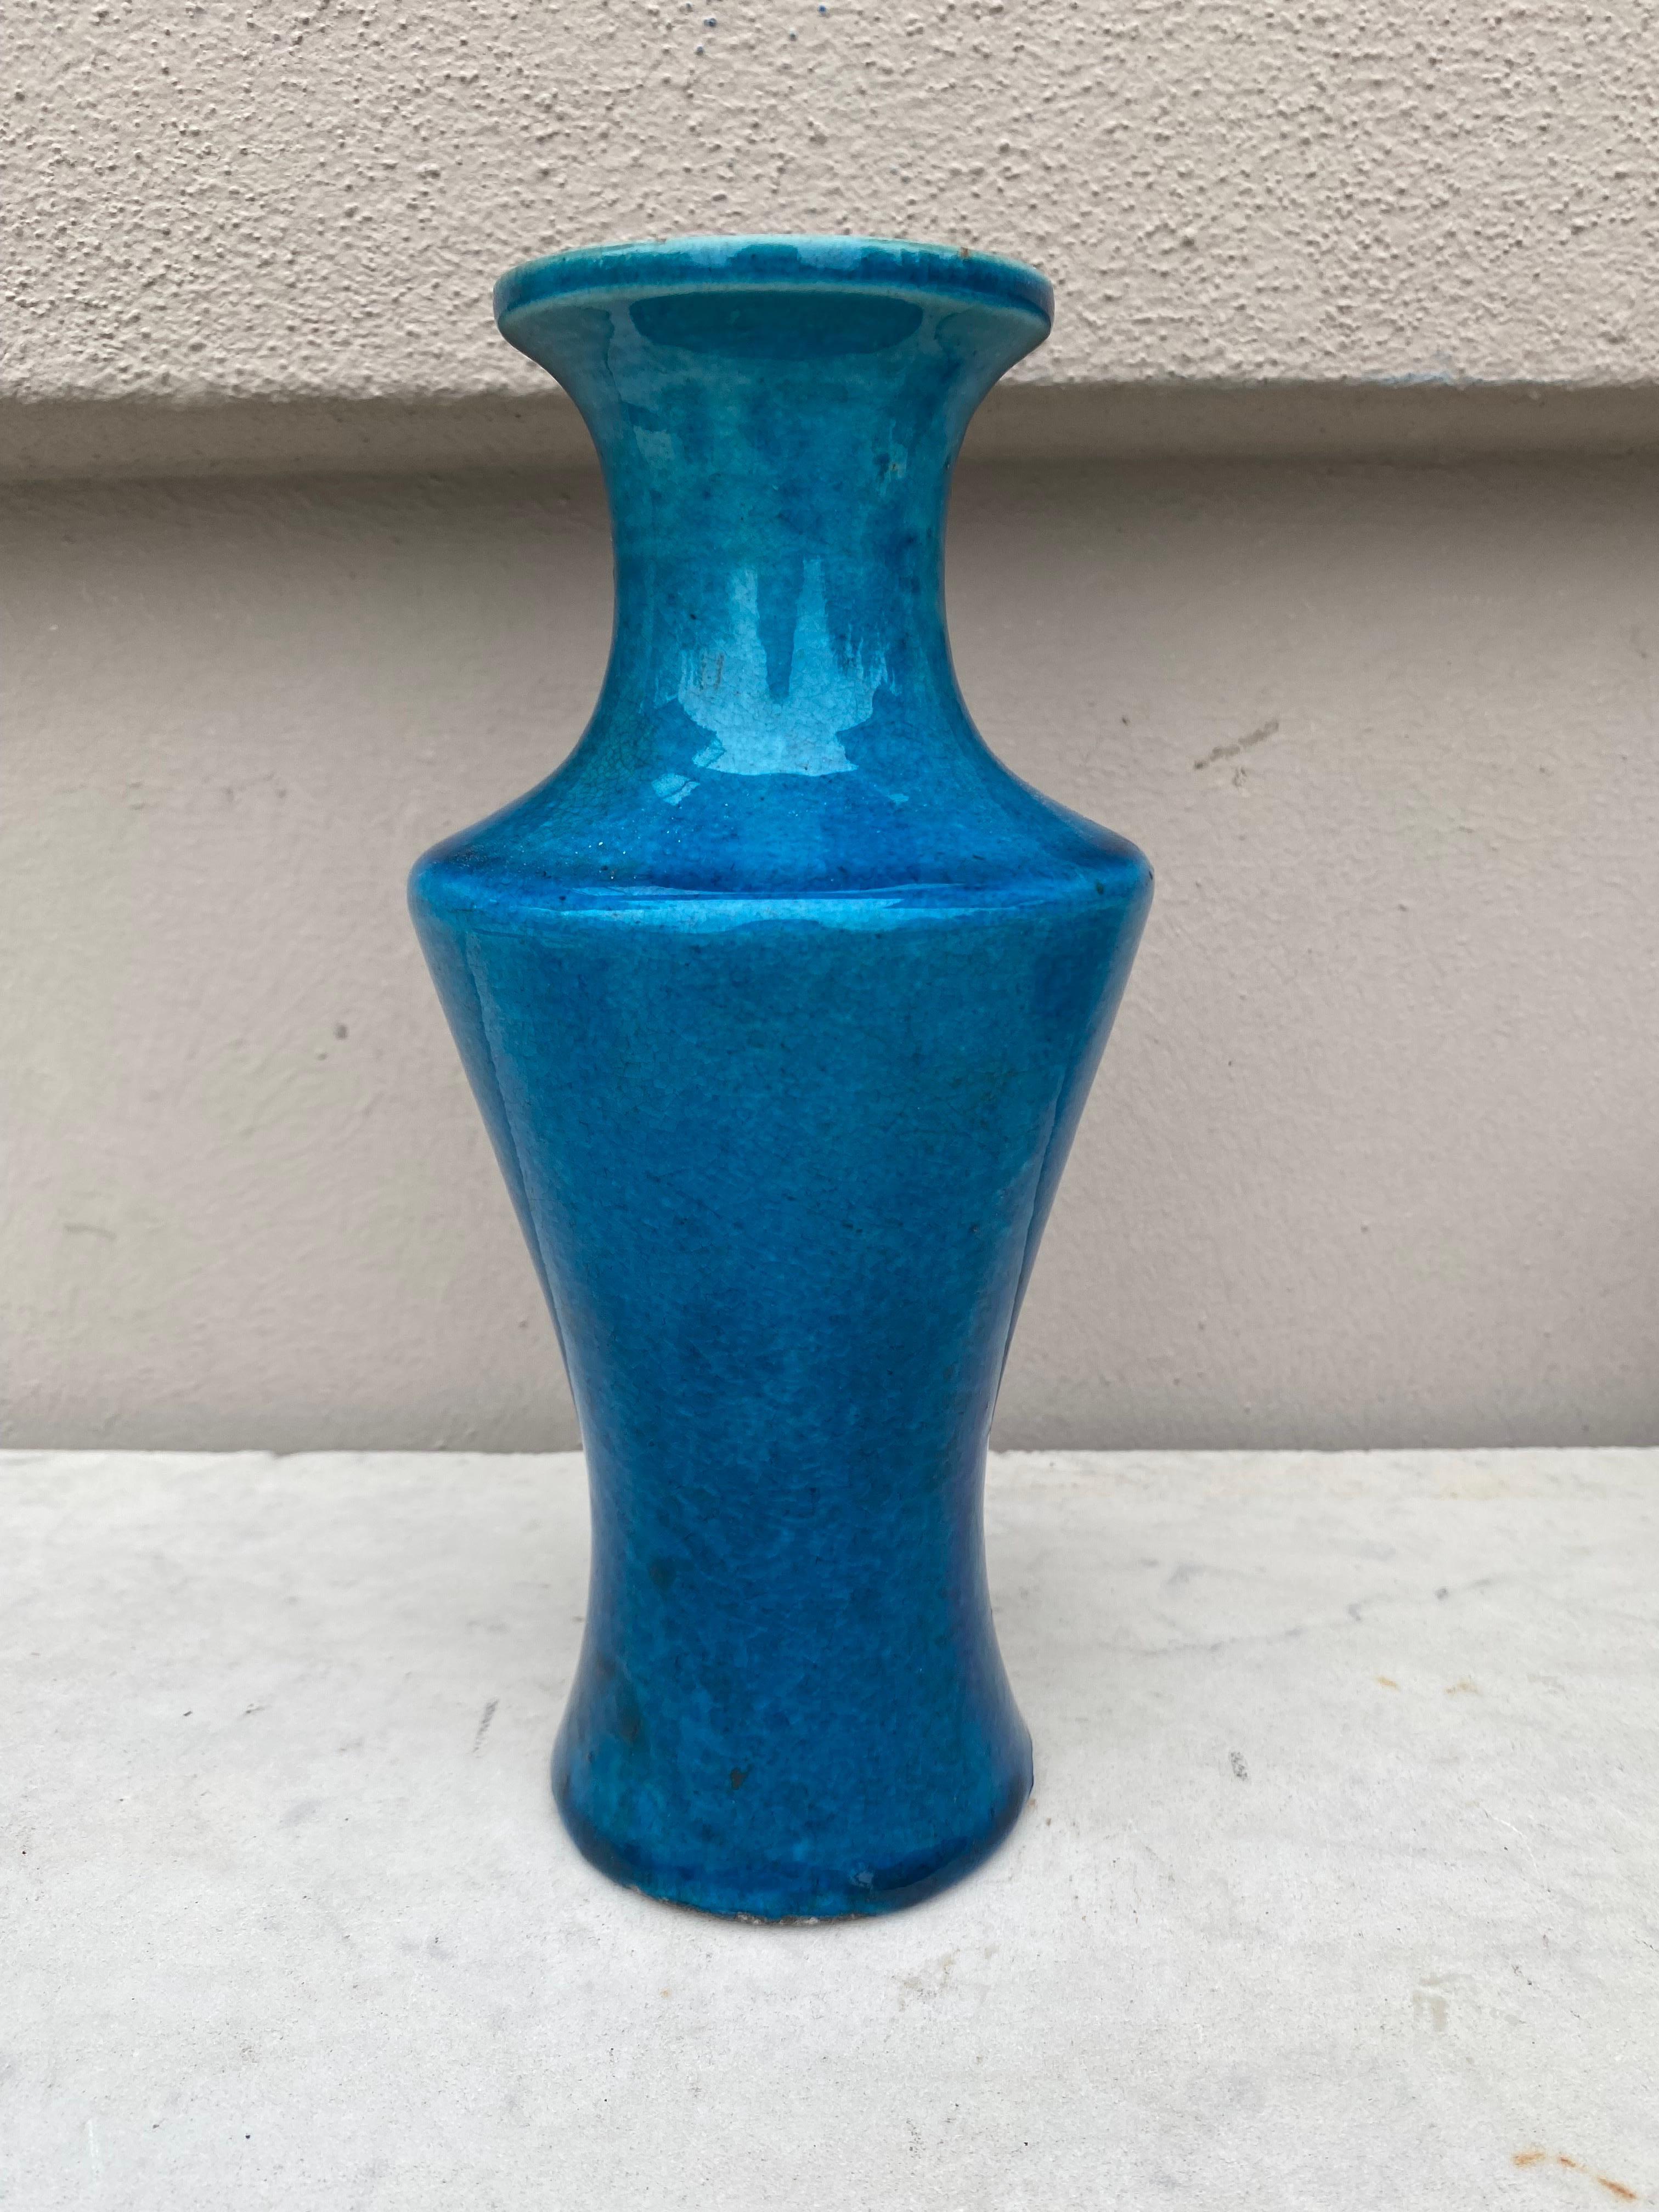 French Art Deco Turquoise Vase Lachenal.
Height / 8,3 inches.